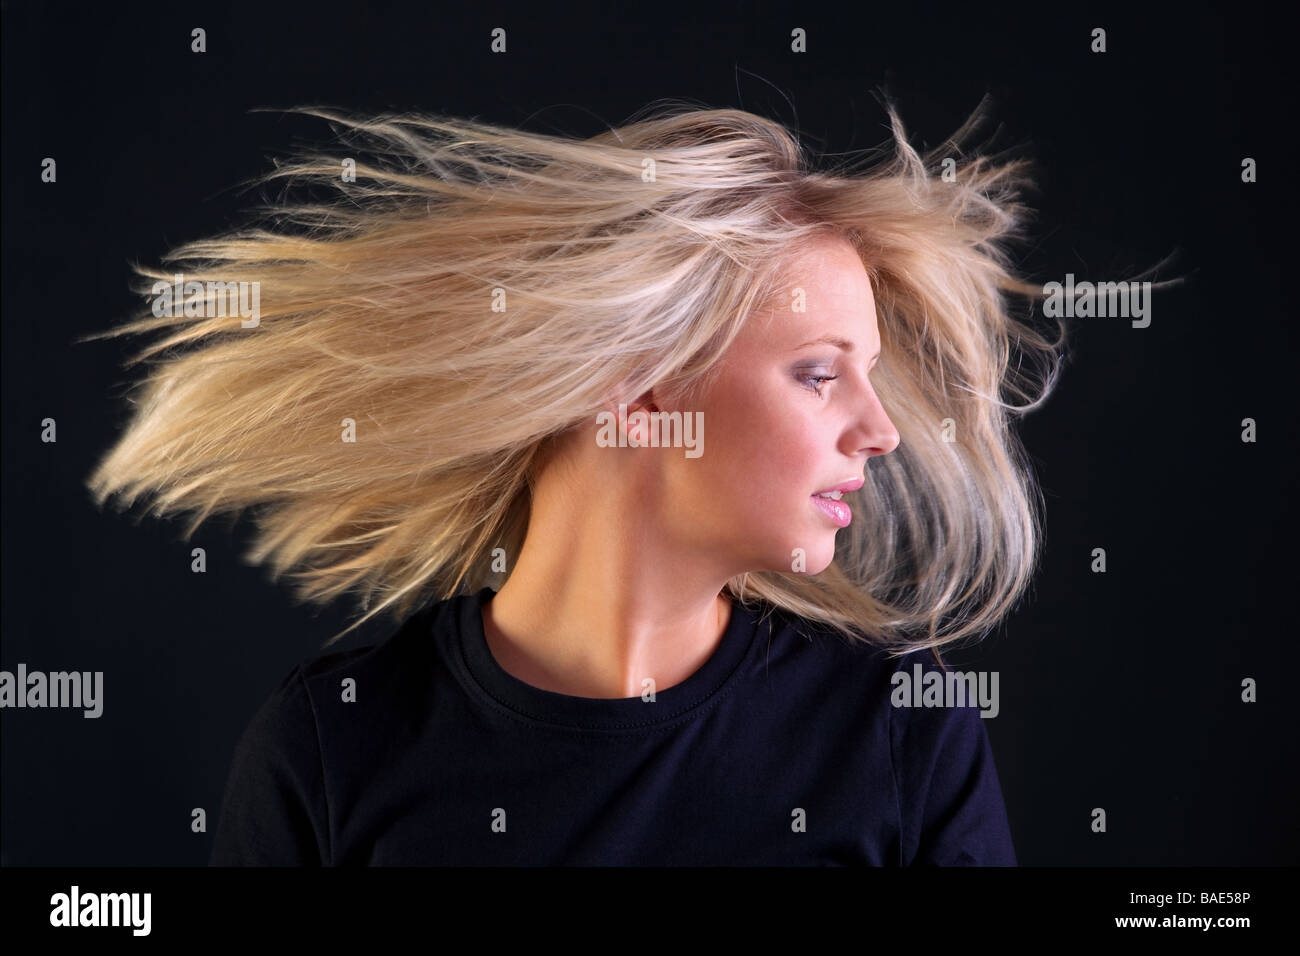 A beautful young woman with long blonde hairstyle turning her head so her hair flows black background Stock Photo